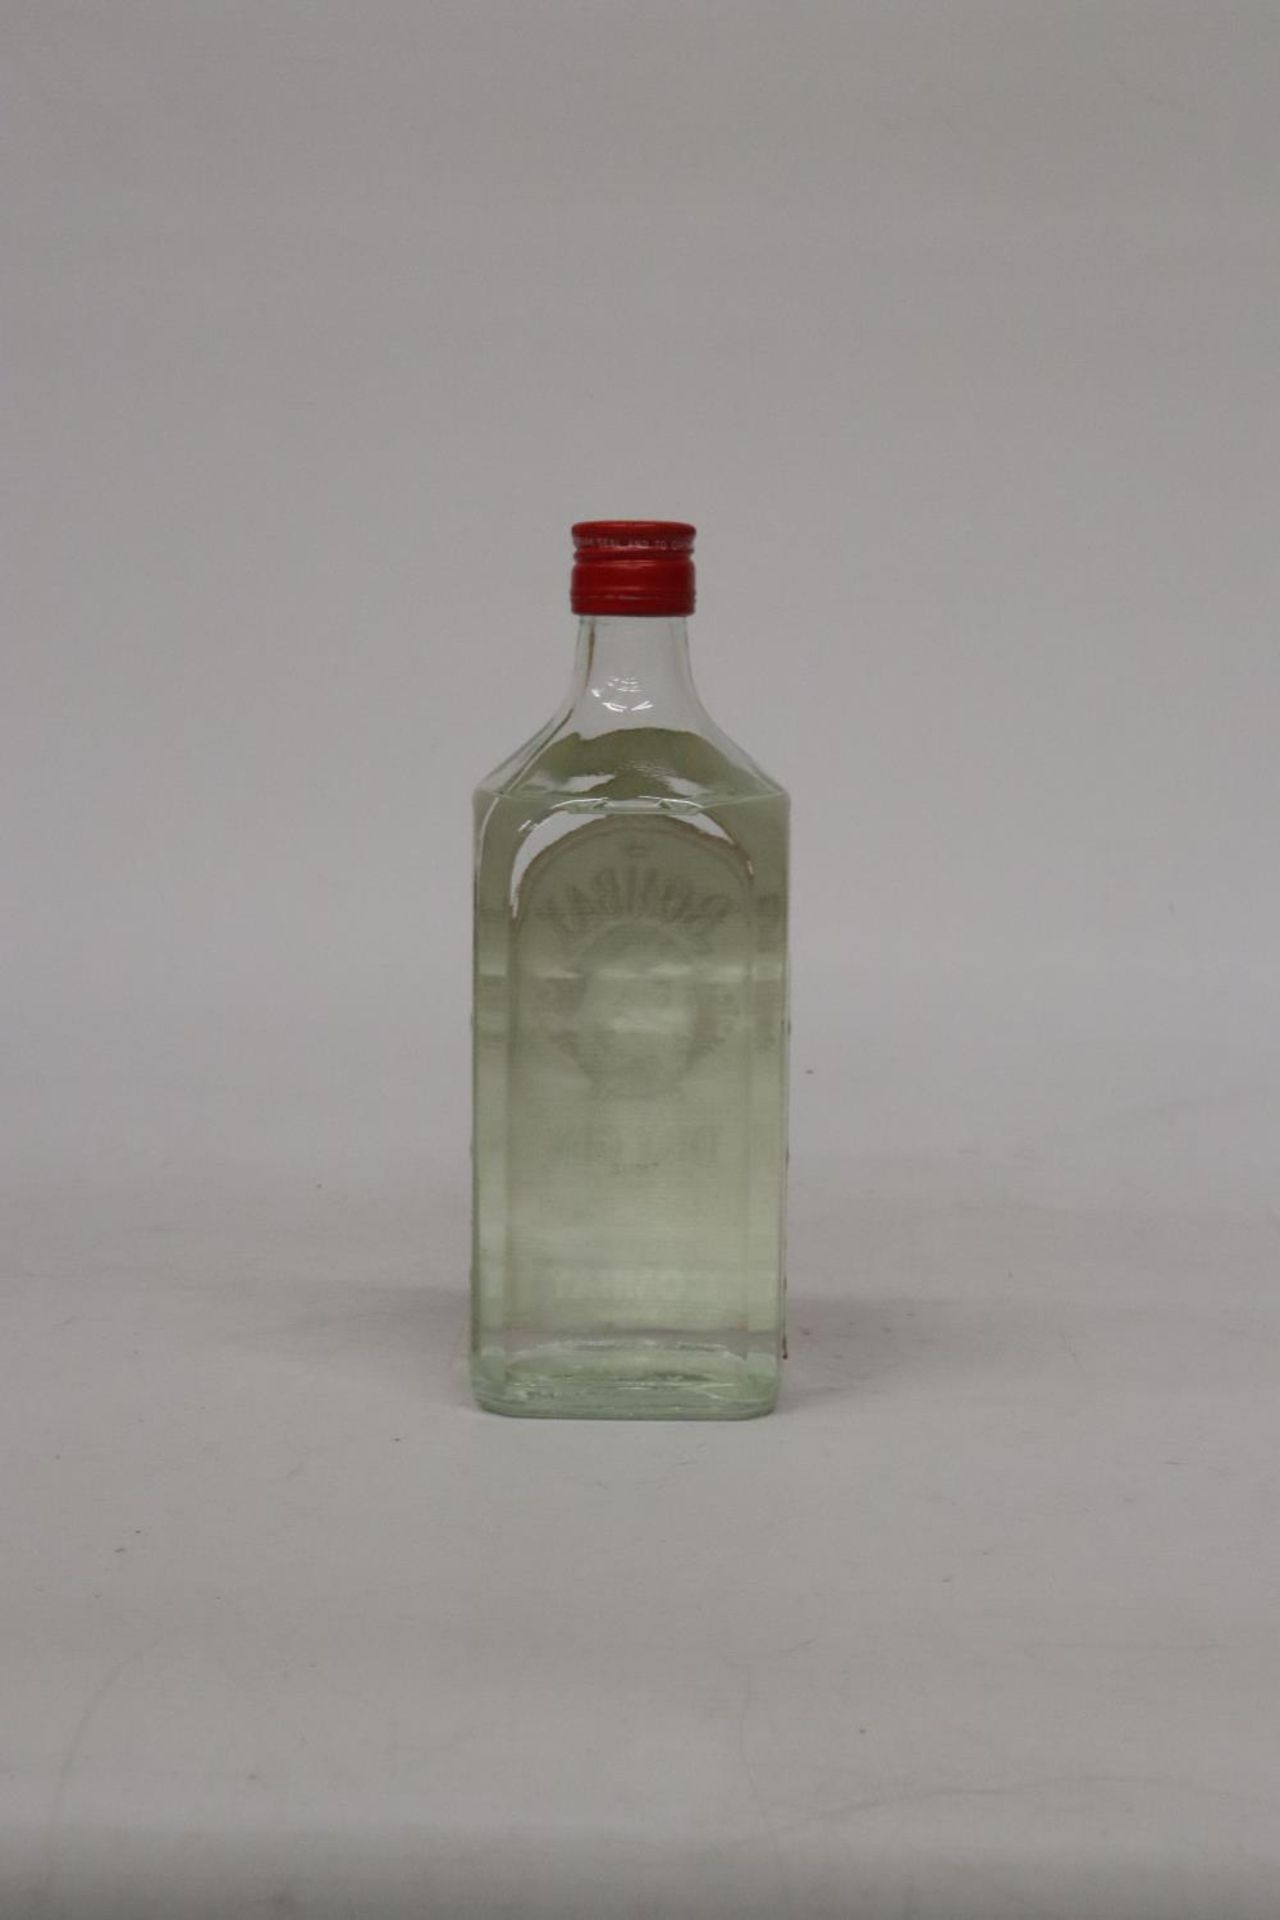 A 75CL BOTTLE OF BOMBAY DISTILLED LONDON DRY GIN - Image 2 of 3